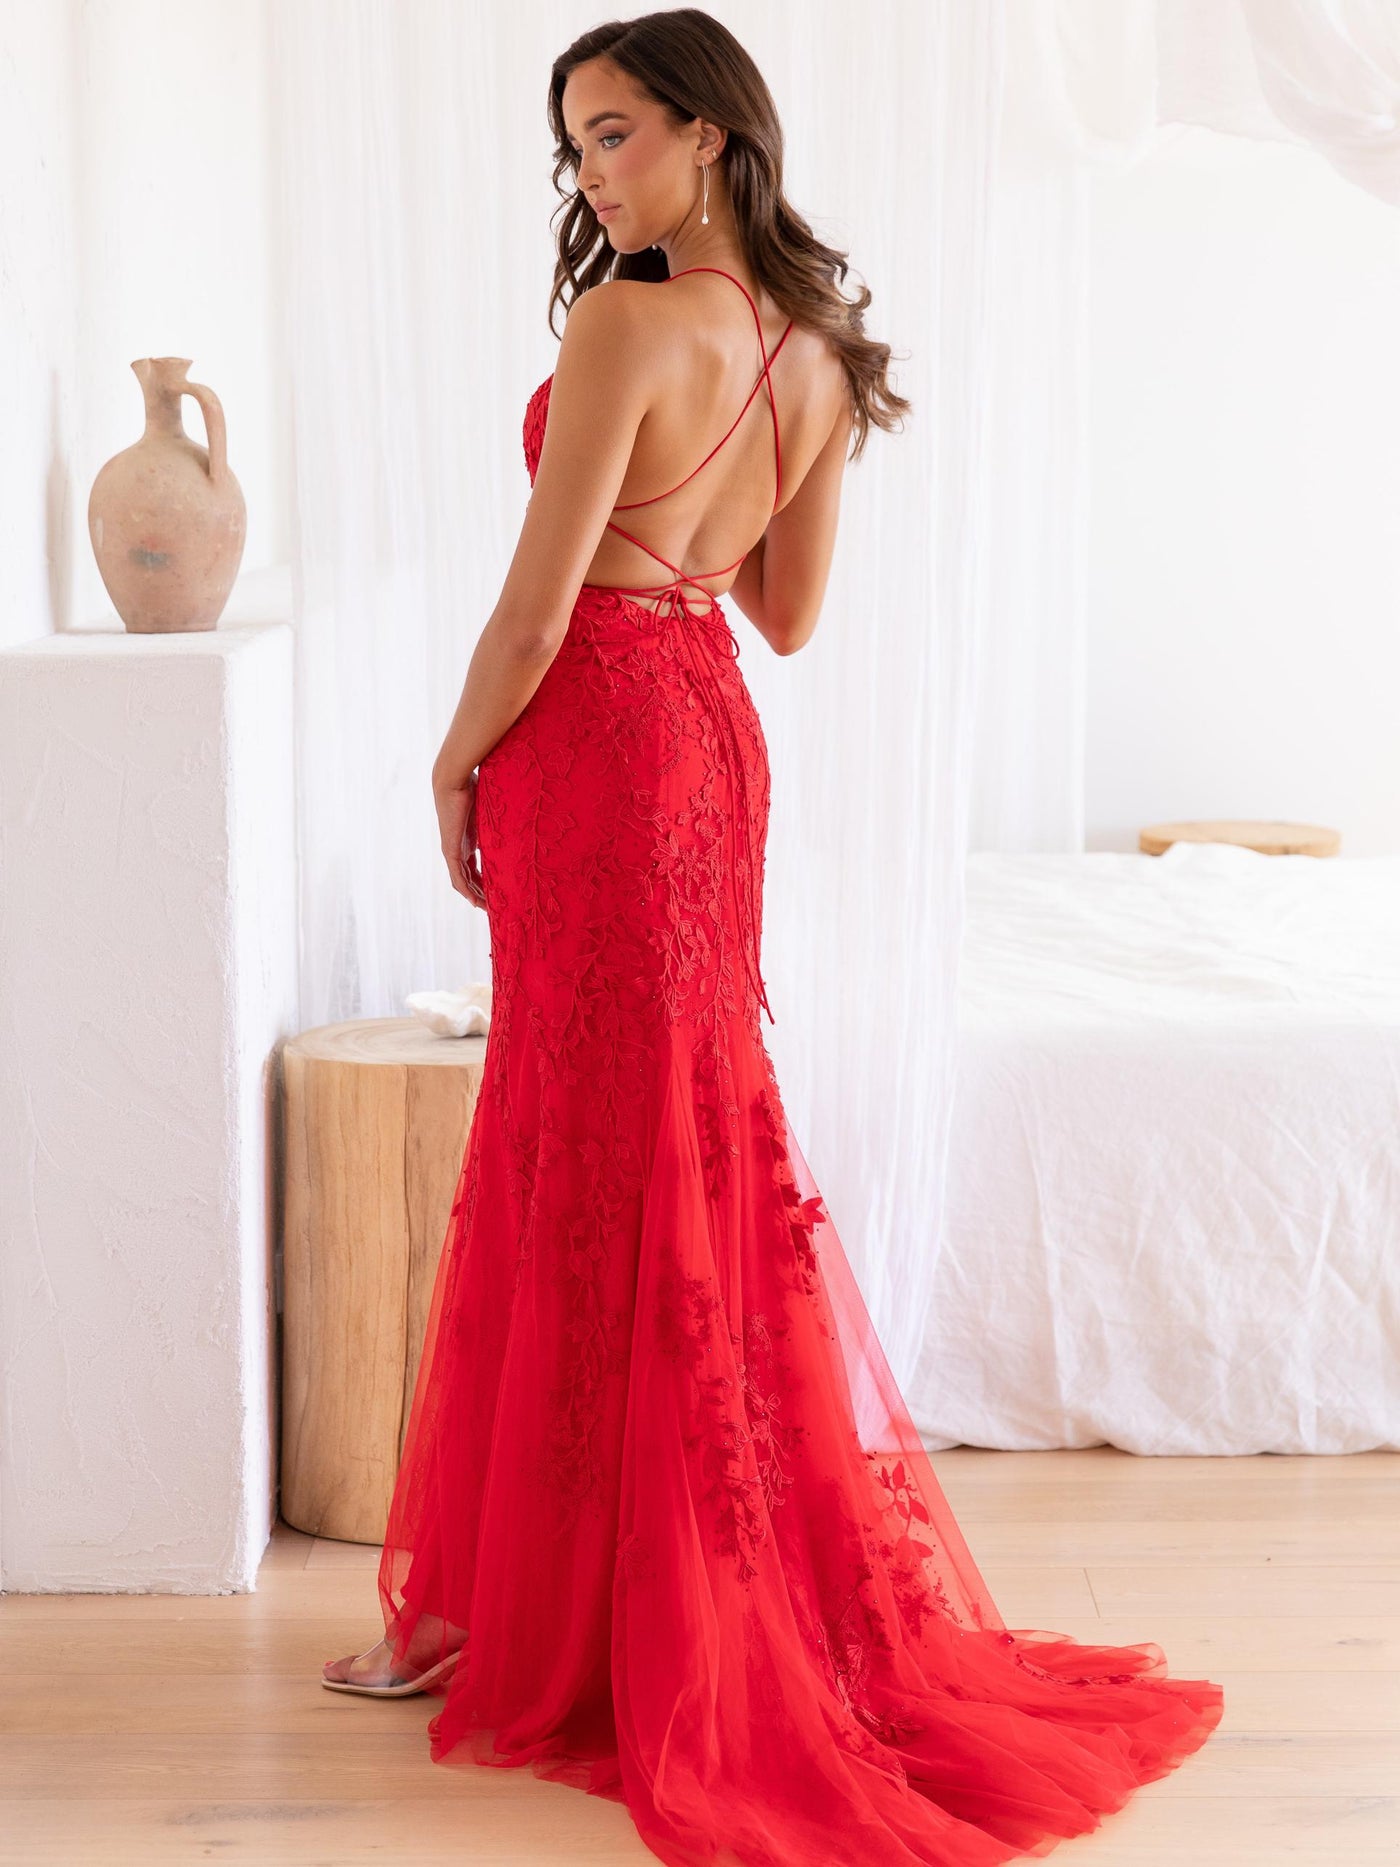 Hire Jawdropping gowns for your next... - Denora Formal Hire | Facebook